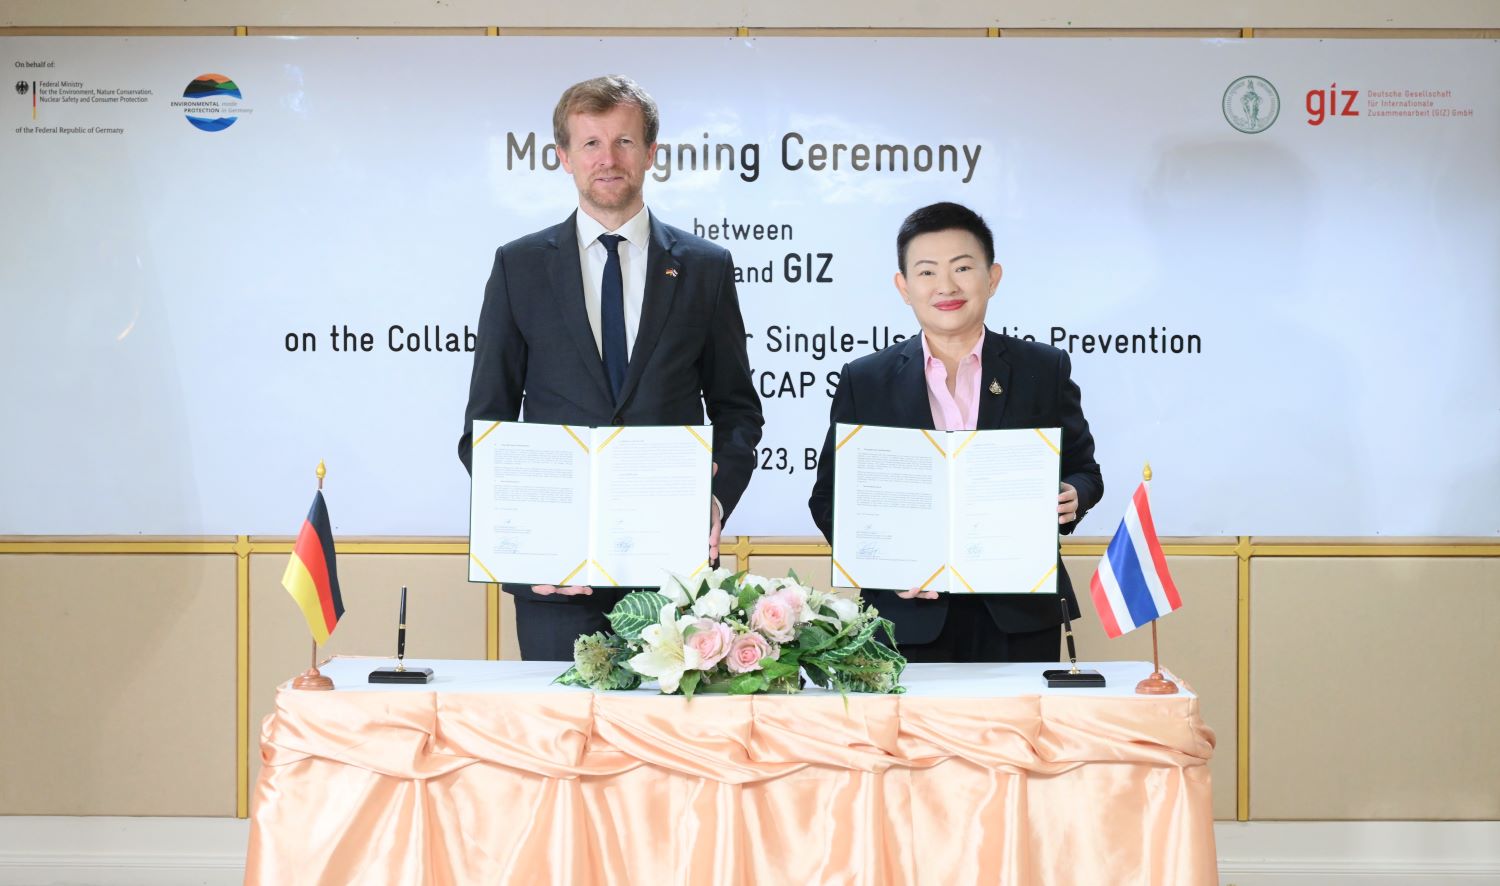 (From left to right) Mr. Reinhold Elges, Country Director of GIZ Thailand, Mrs. Wantanee Wattana, Deputy Permanent Secretary and Acting Permanent Secretary of the BMA